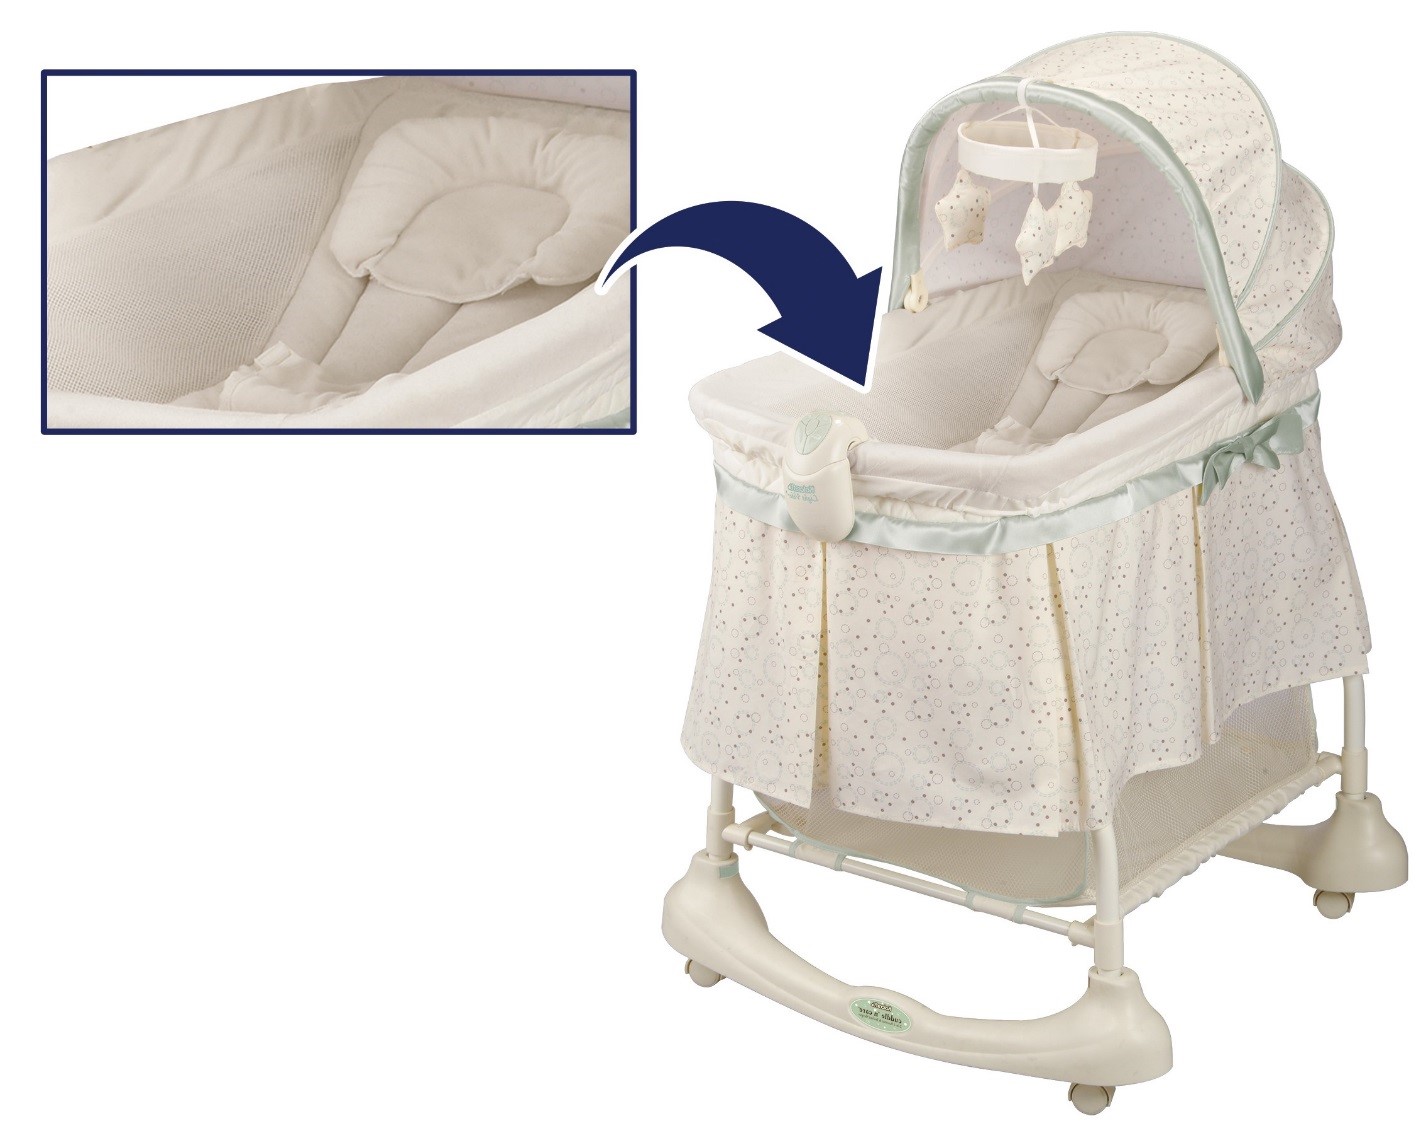 Inclined sleeper accessory included with Kolcraft Cuddle 'n Care 2-in-1 Bassinet & Incline Sleepers and Preferred Position 2-in-1 Bassinet & Incline Sleepers